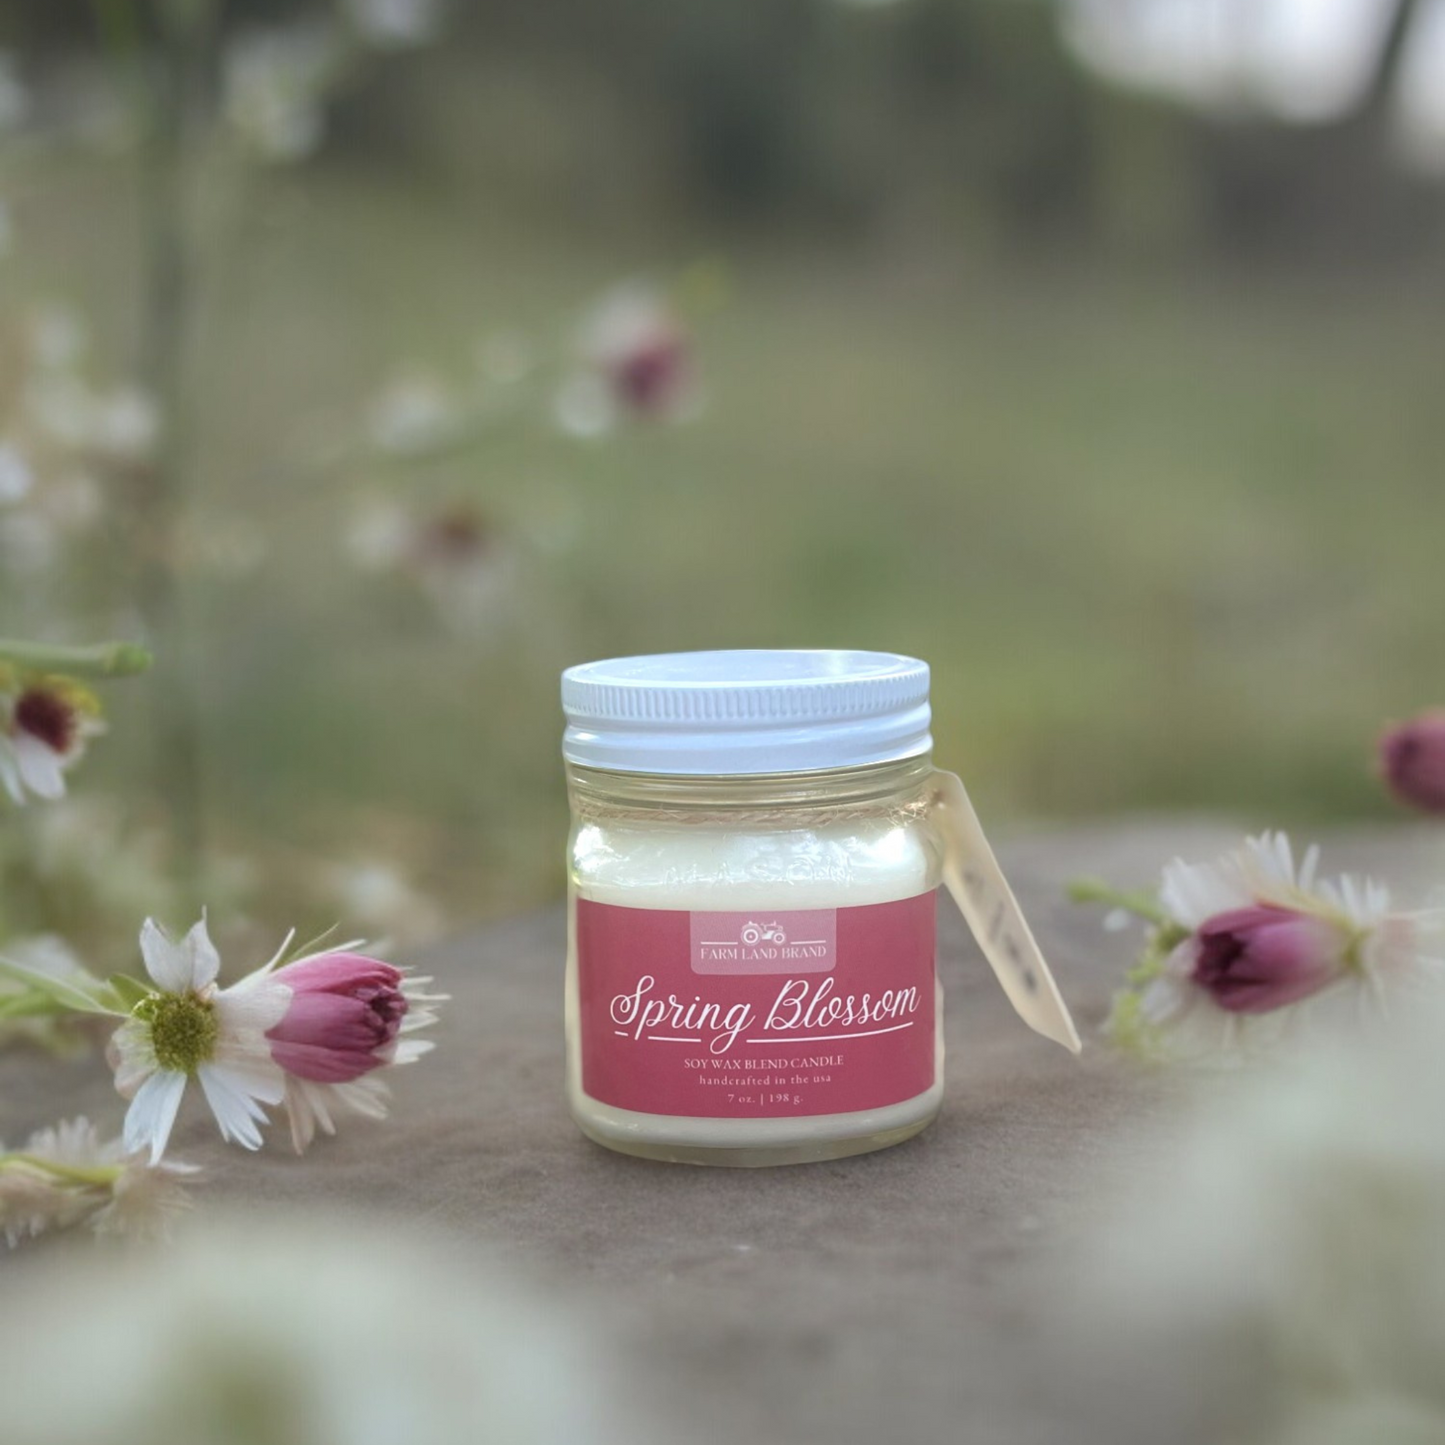 Spring Blossom Soy Wax Mason Jar Candle  Scented with Freesia and Spring Air